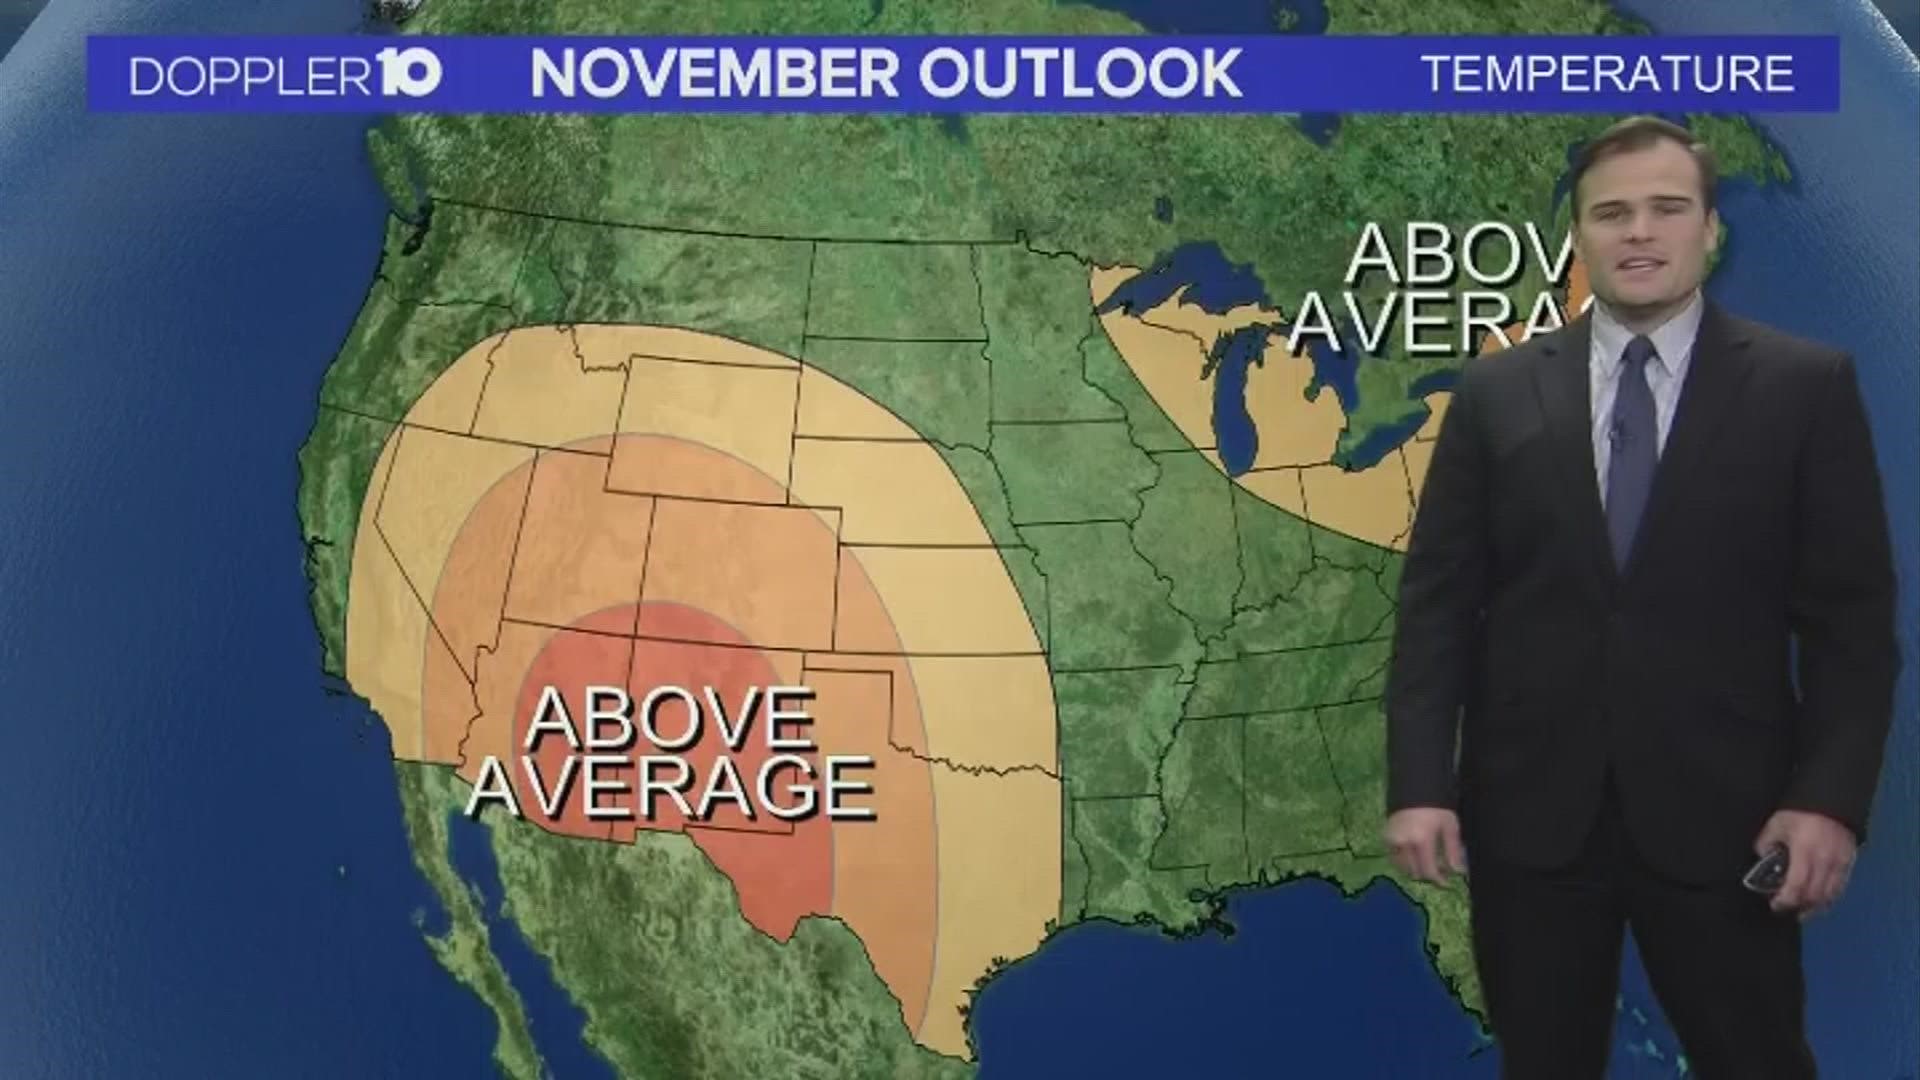 Data over the past 10 warmest Octobers show that we could be in for a cooler than average November.